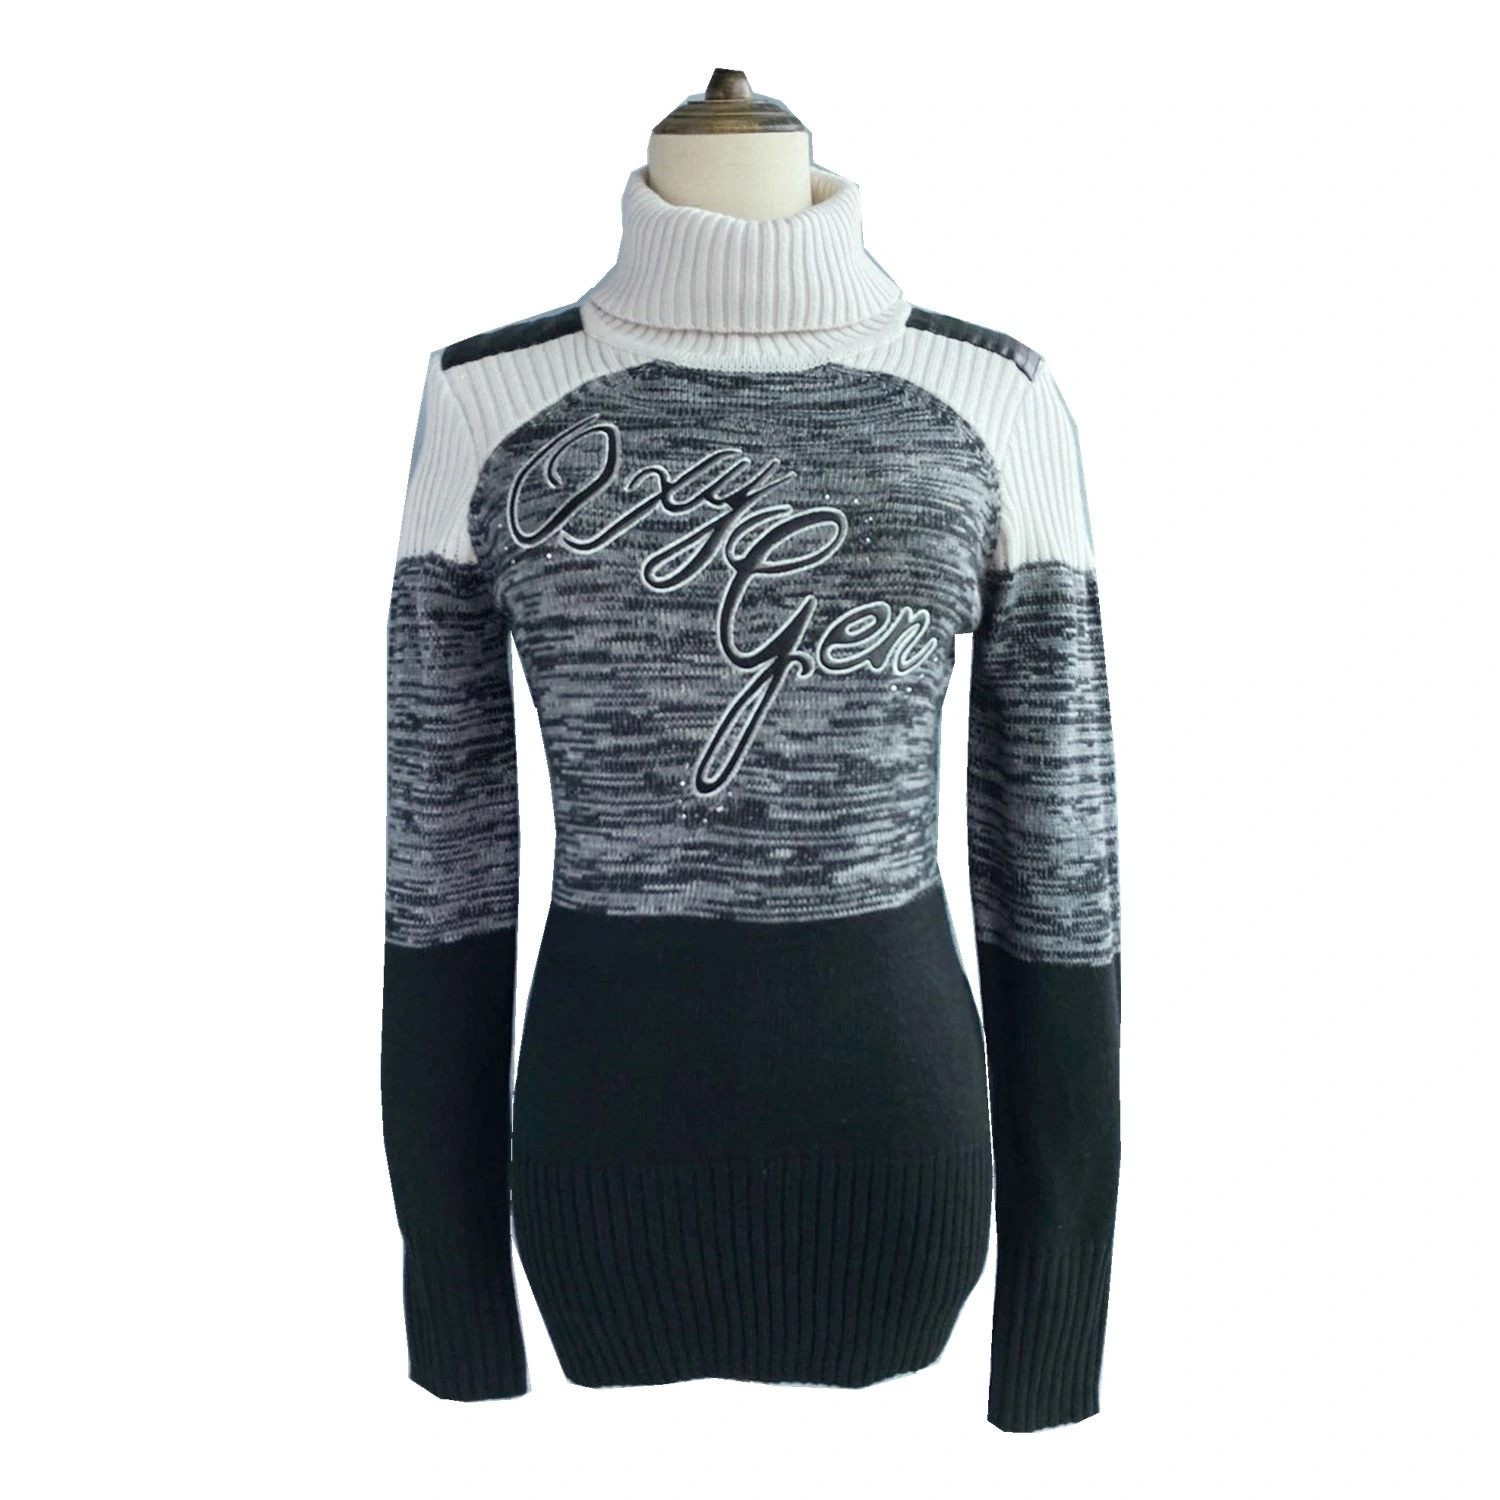 Women Sweaters - Bangladesh Factory, Suppliers, Manufacturers